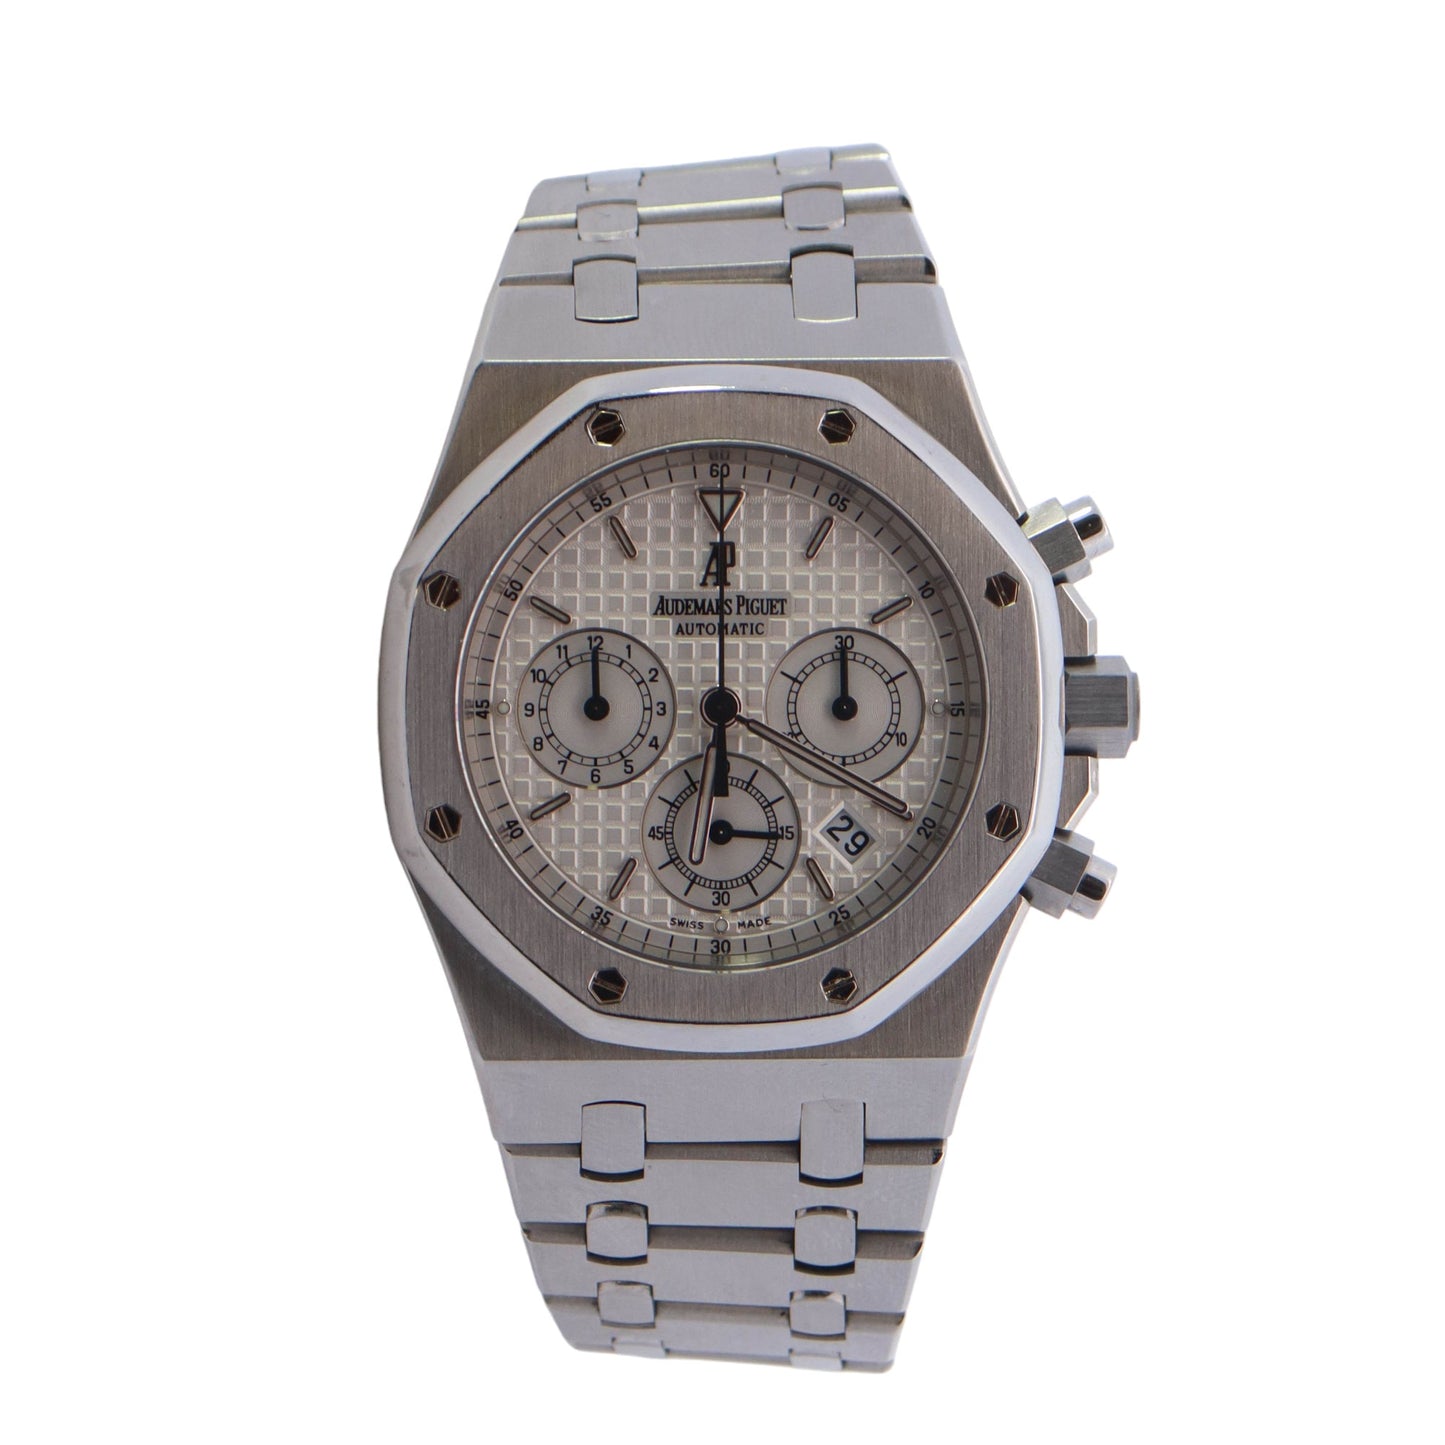 Audemars Piguet Royal Oak Chronograph Stainless Steel 39mm White Chronograph Stick Dial Watch Reference #: 25860ST.OO.1110ST.05 - Happy Jewelers Fine Jewelry Lifetime Warranty